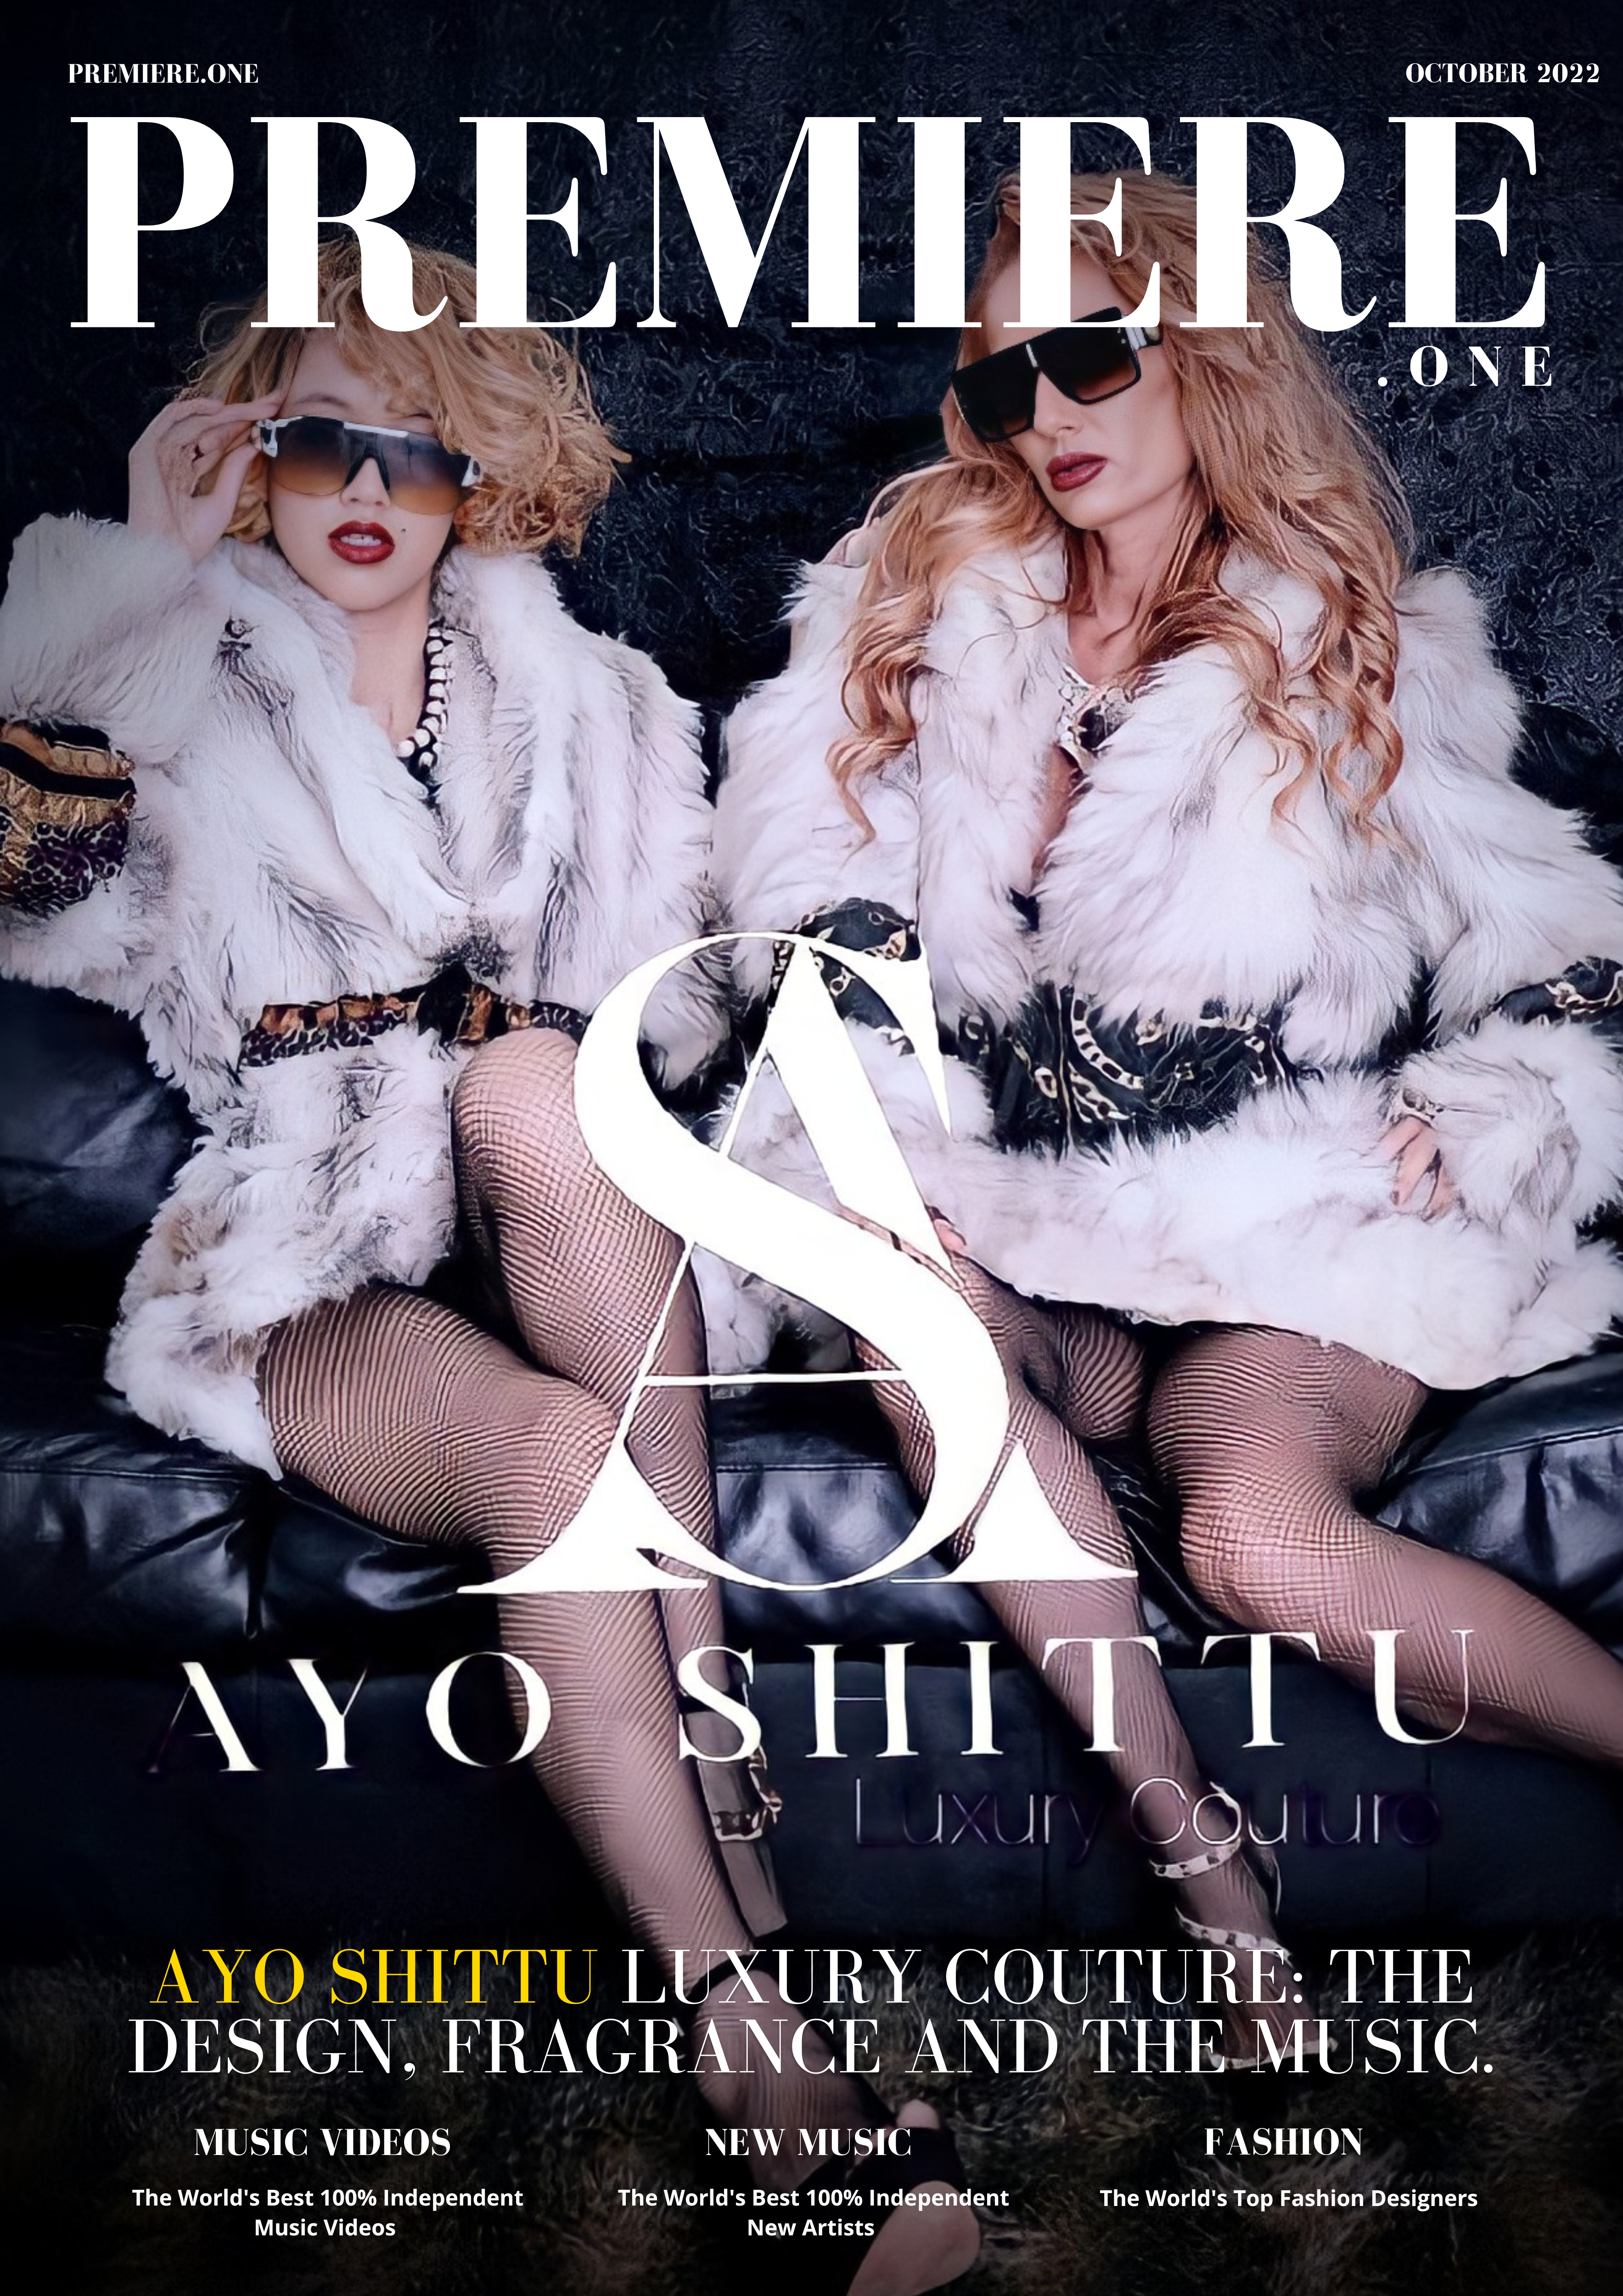 Ayo Shittu Luxury Couture is a brand, fragrance, music inspiration and clothing brand.